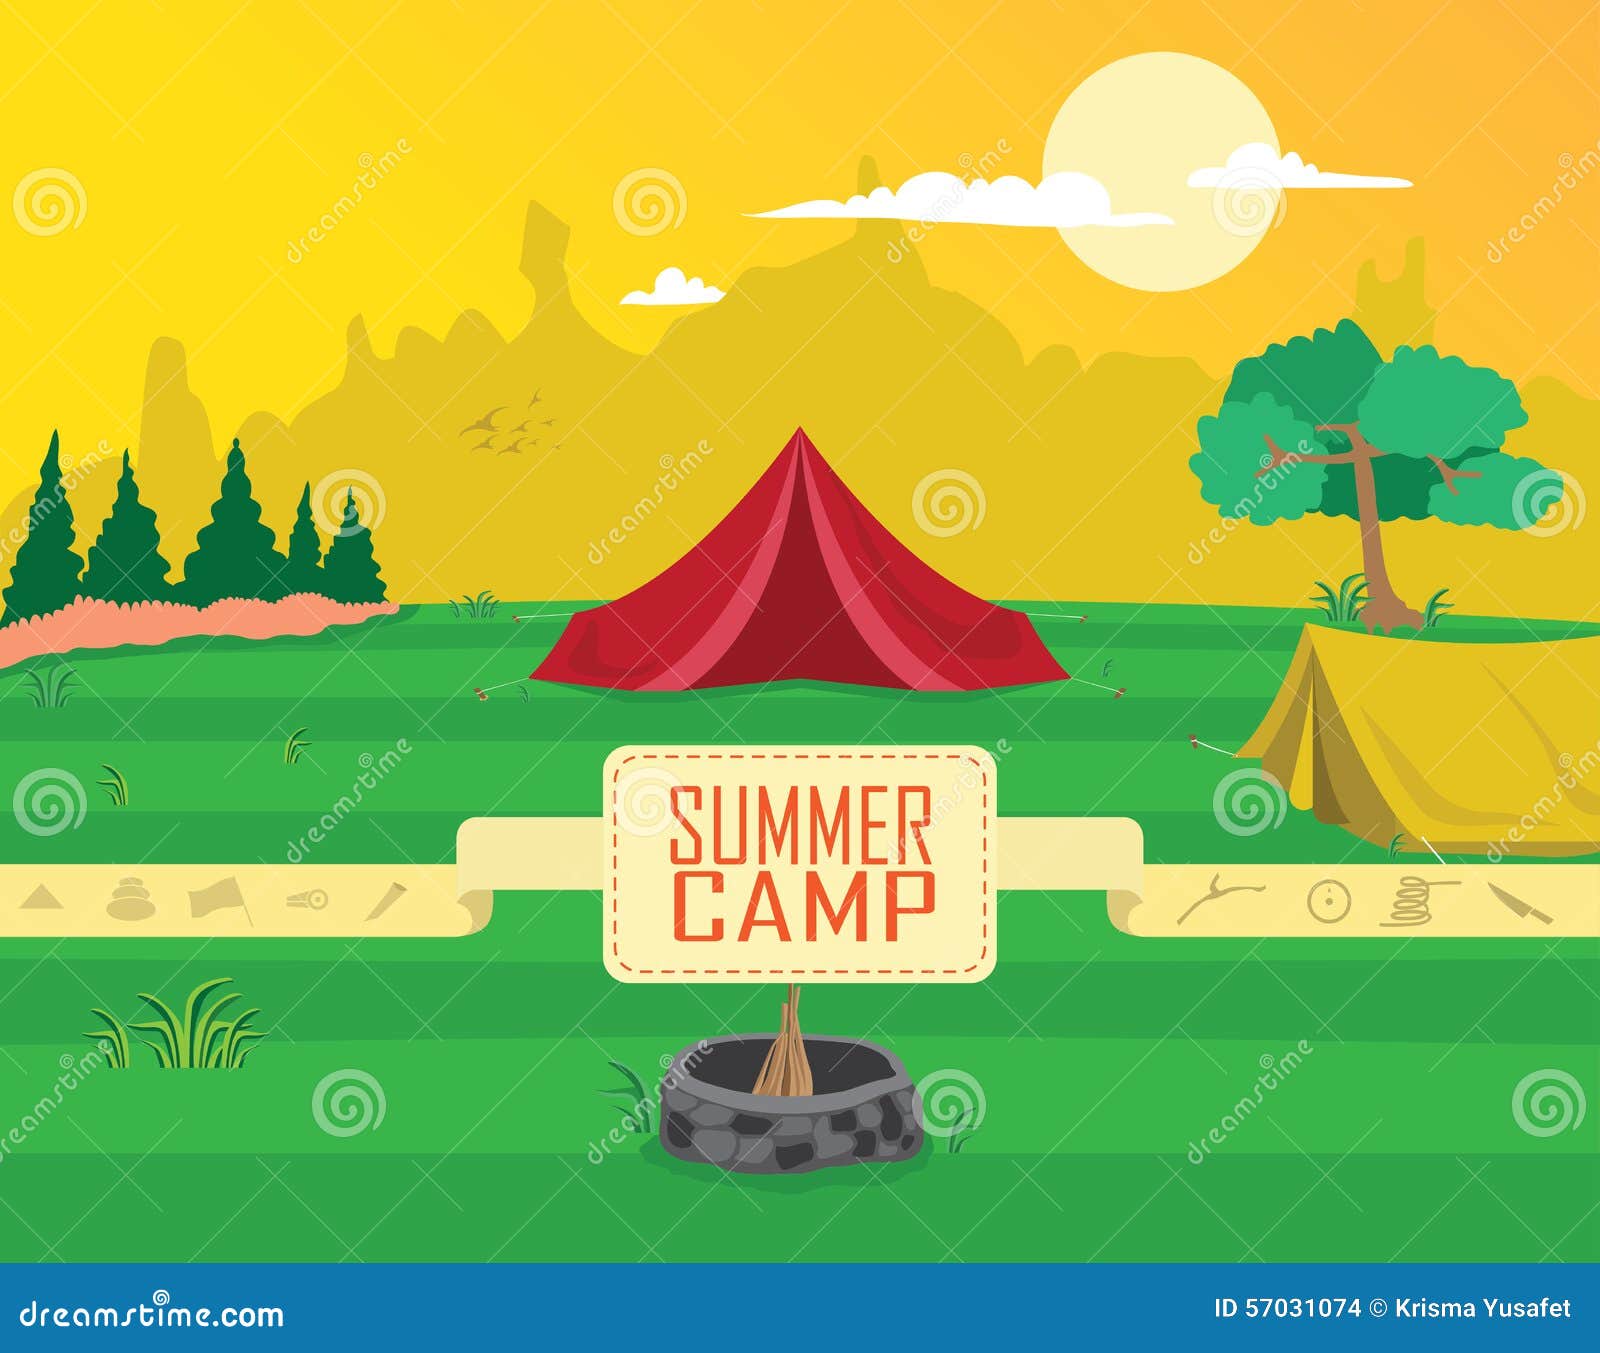 summer camp clipart images - photo #44